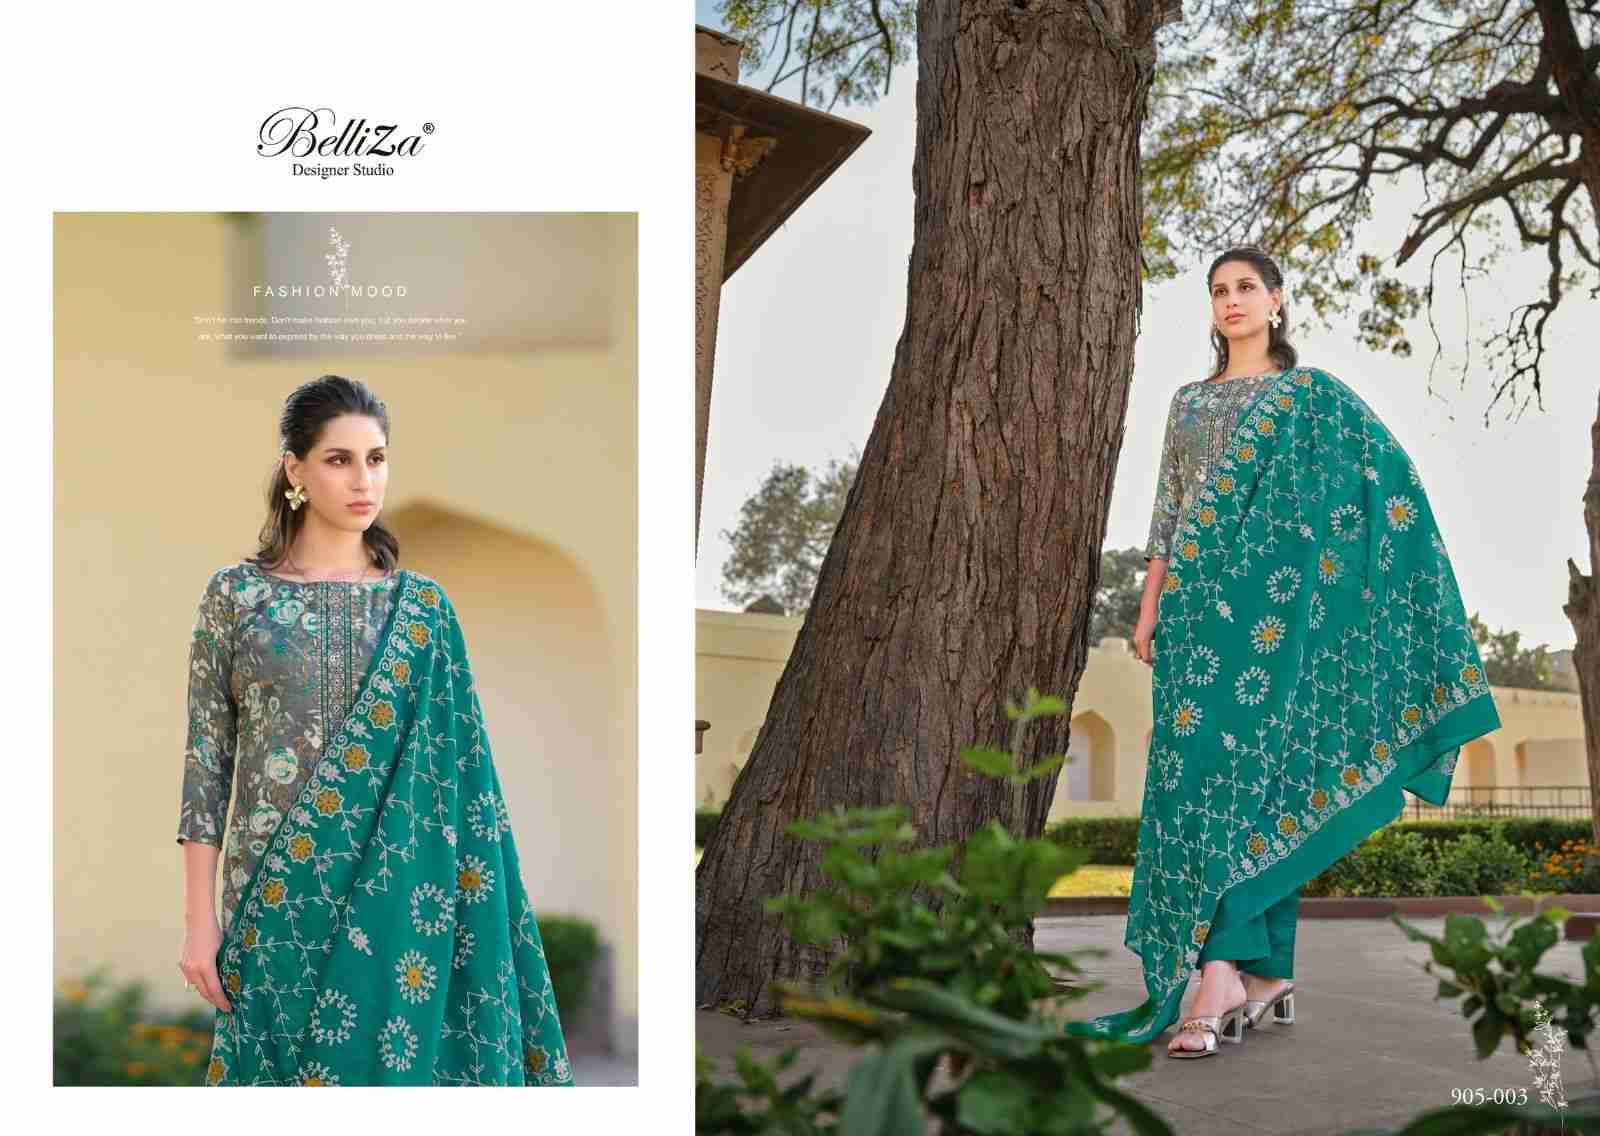 Sophia Vol-3 By Belliza 905-001 To 905-008 Series Indian Traditional Wear Collection Beautiful Stylish Fancy Colorful Party Wear & Wear Pure Cotton Digital Printed Dress At Wholesale Price